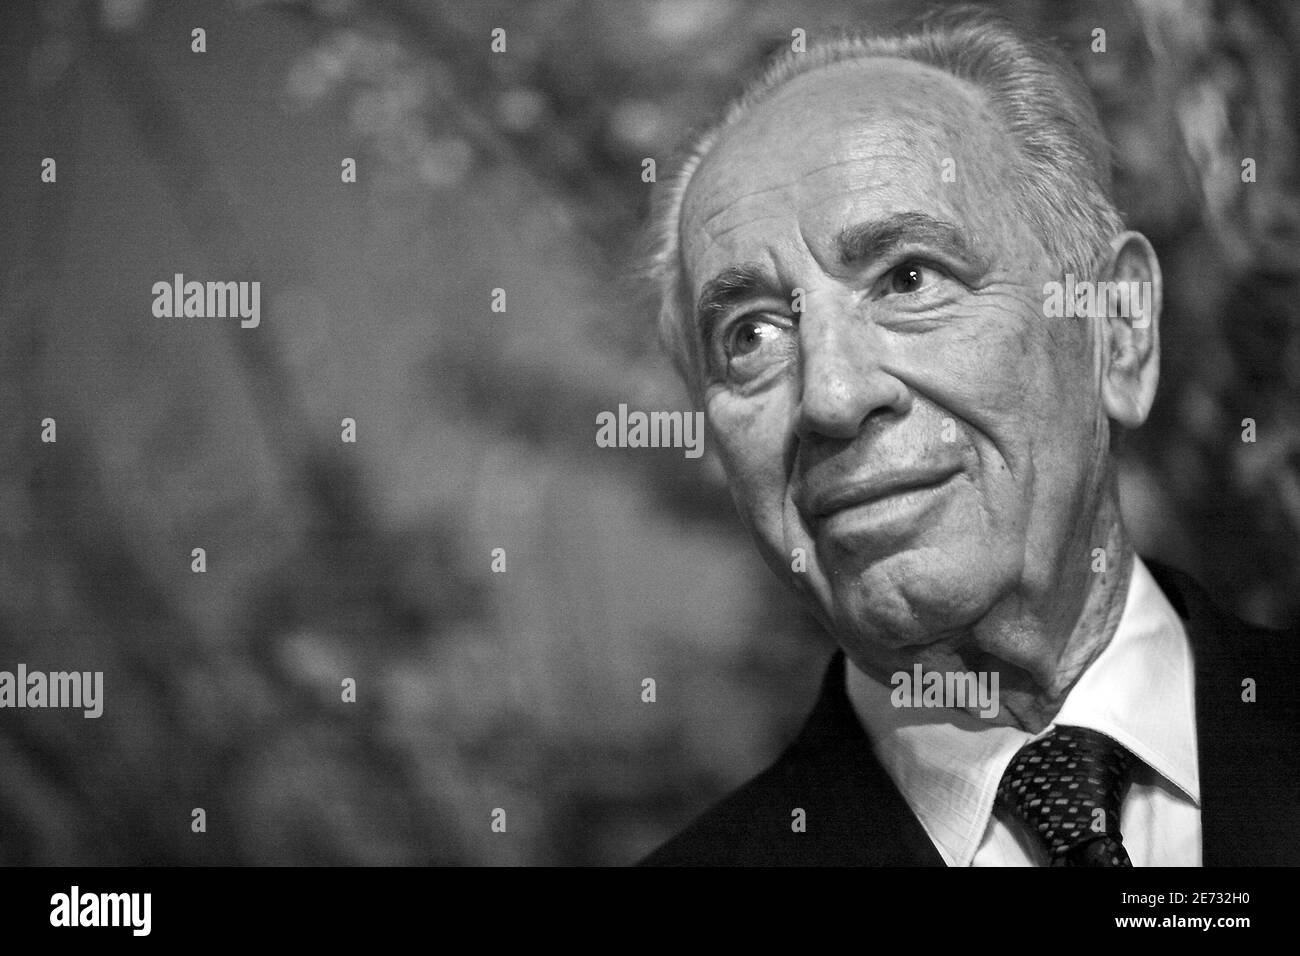 'Israeli Vice Prime Minister Shimon Peres attends a cocktail reception for the US release of ''Shimon Peres: the Biography'' written by Michael Bar-Zohar, at the French Consulate in New York City, USA on February 26, 2007. Photo by Gerald Holubowicz/ABACAPRESS.COM' Stock Photo